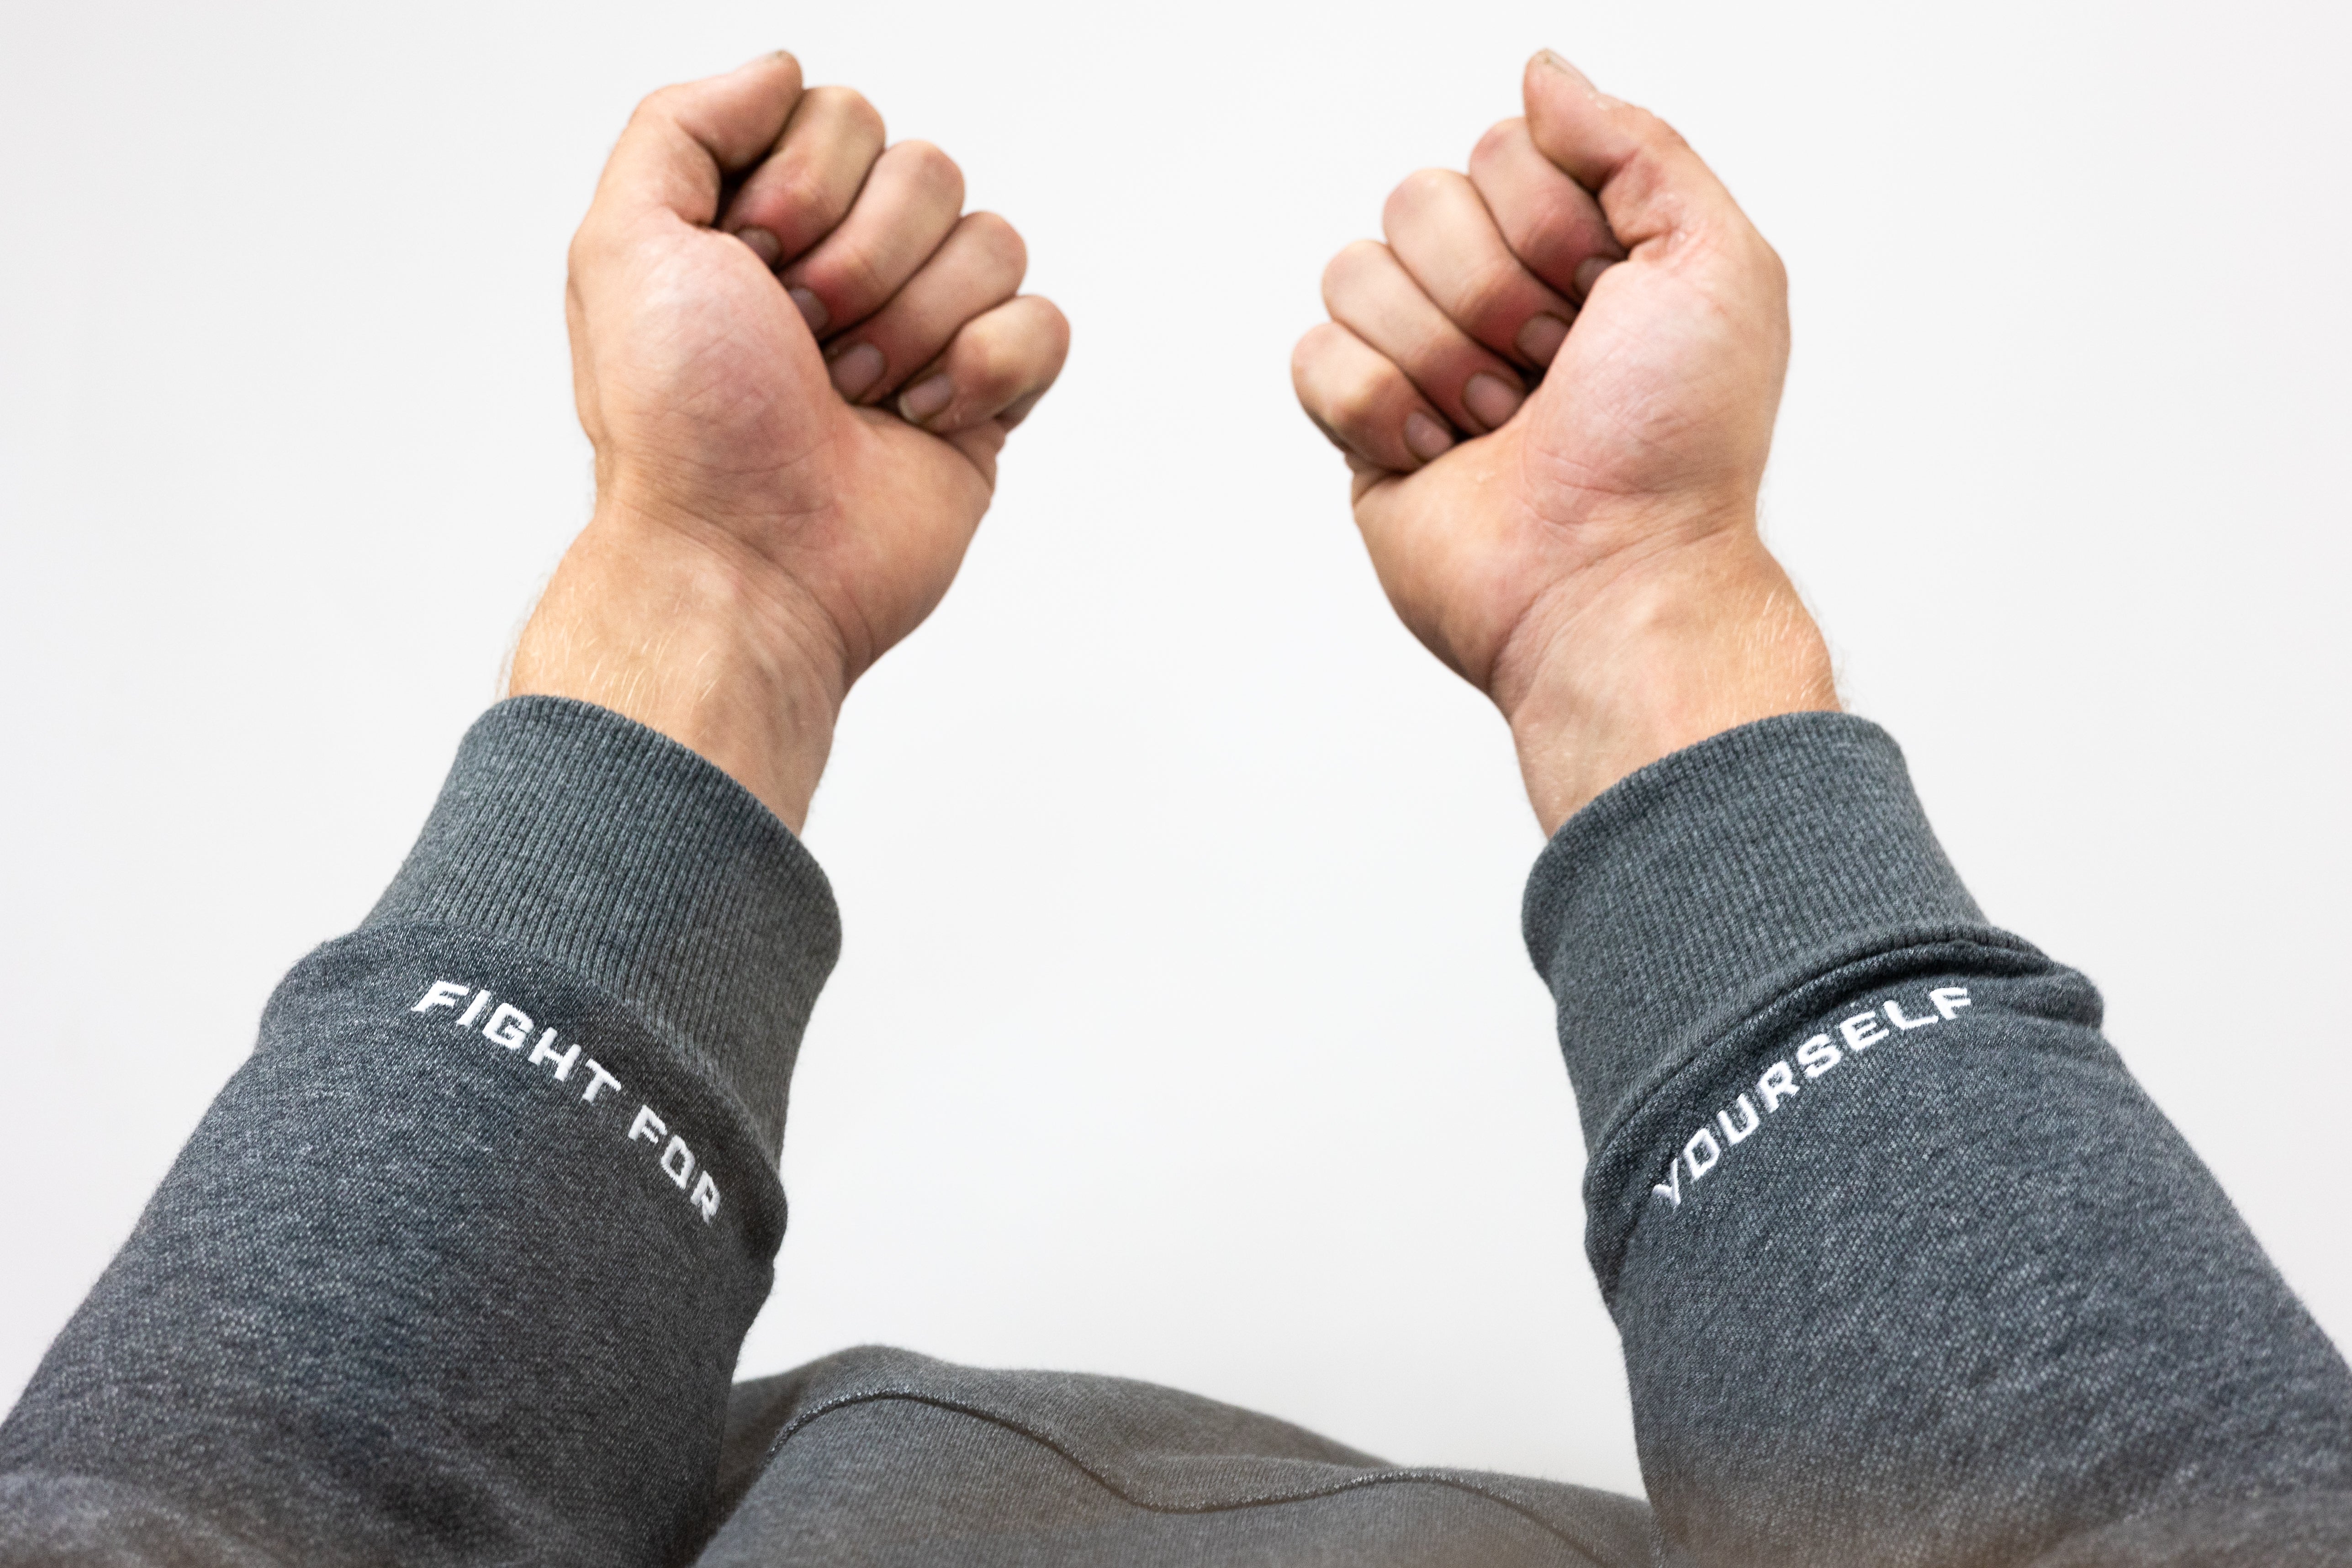 Two arms with hands clenched in fists wearing gray hoodie with text "Fight For" and "Yourself" on fabric at wrist